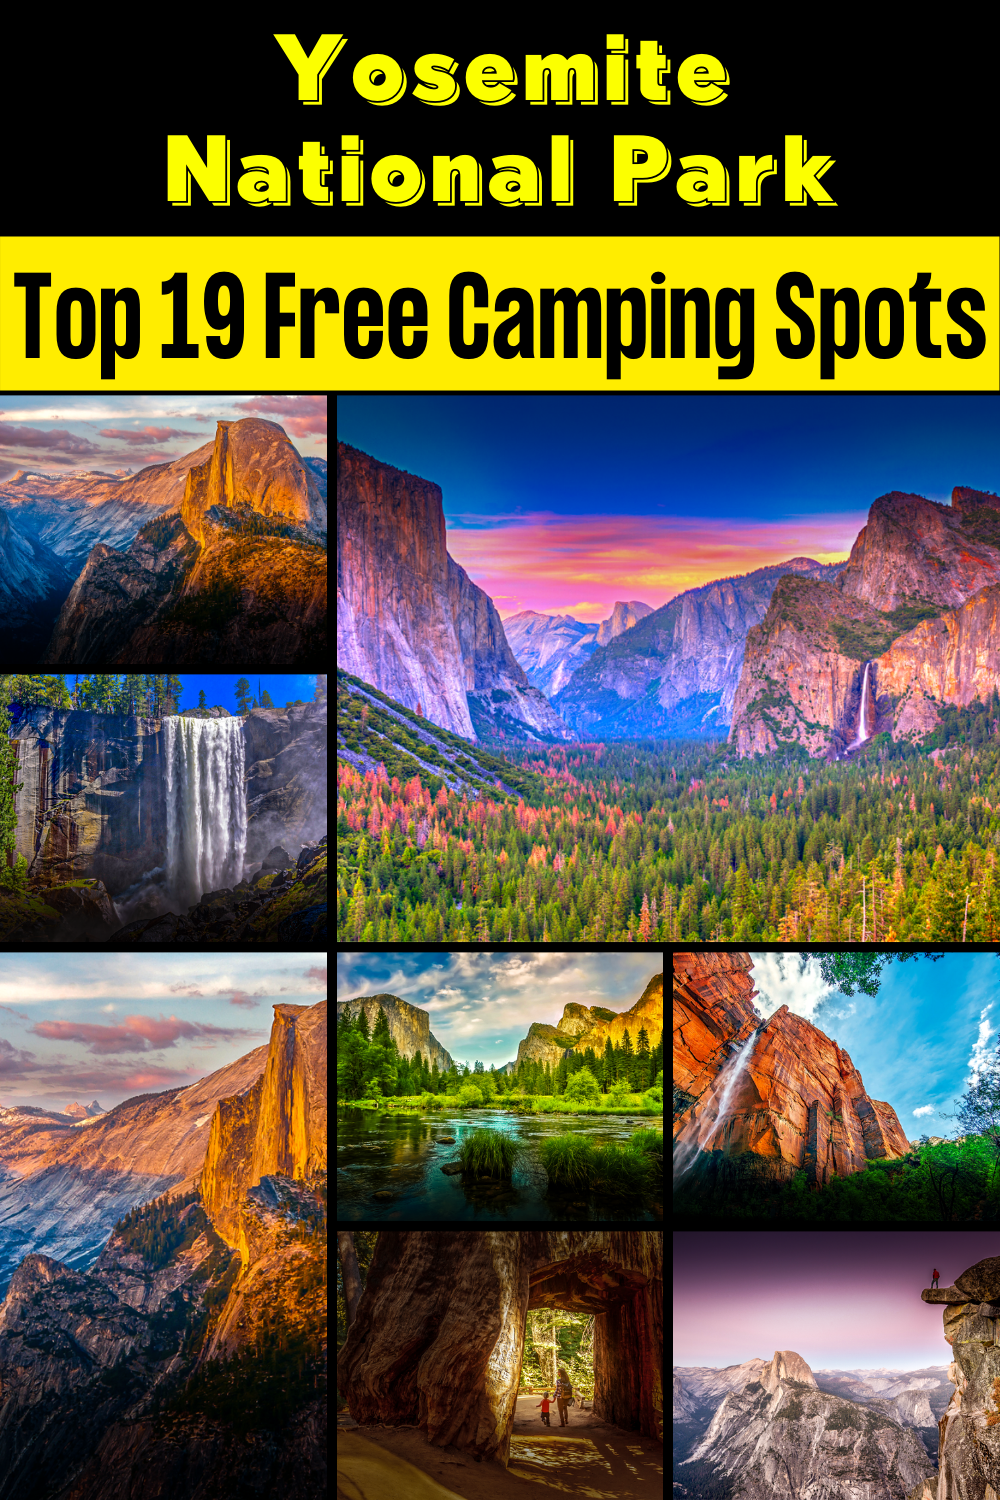 19 Free Campsites for Yosemite National Park